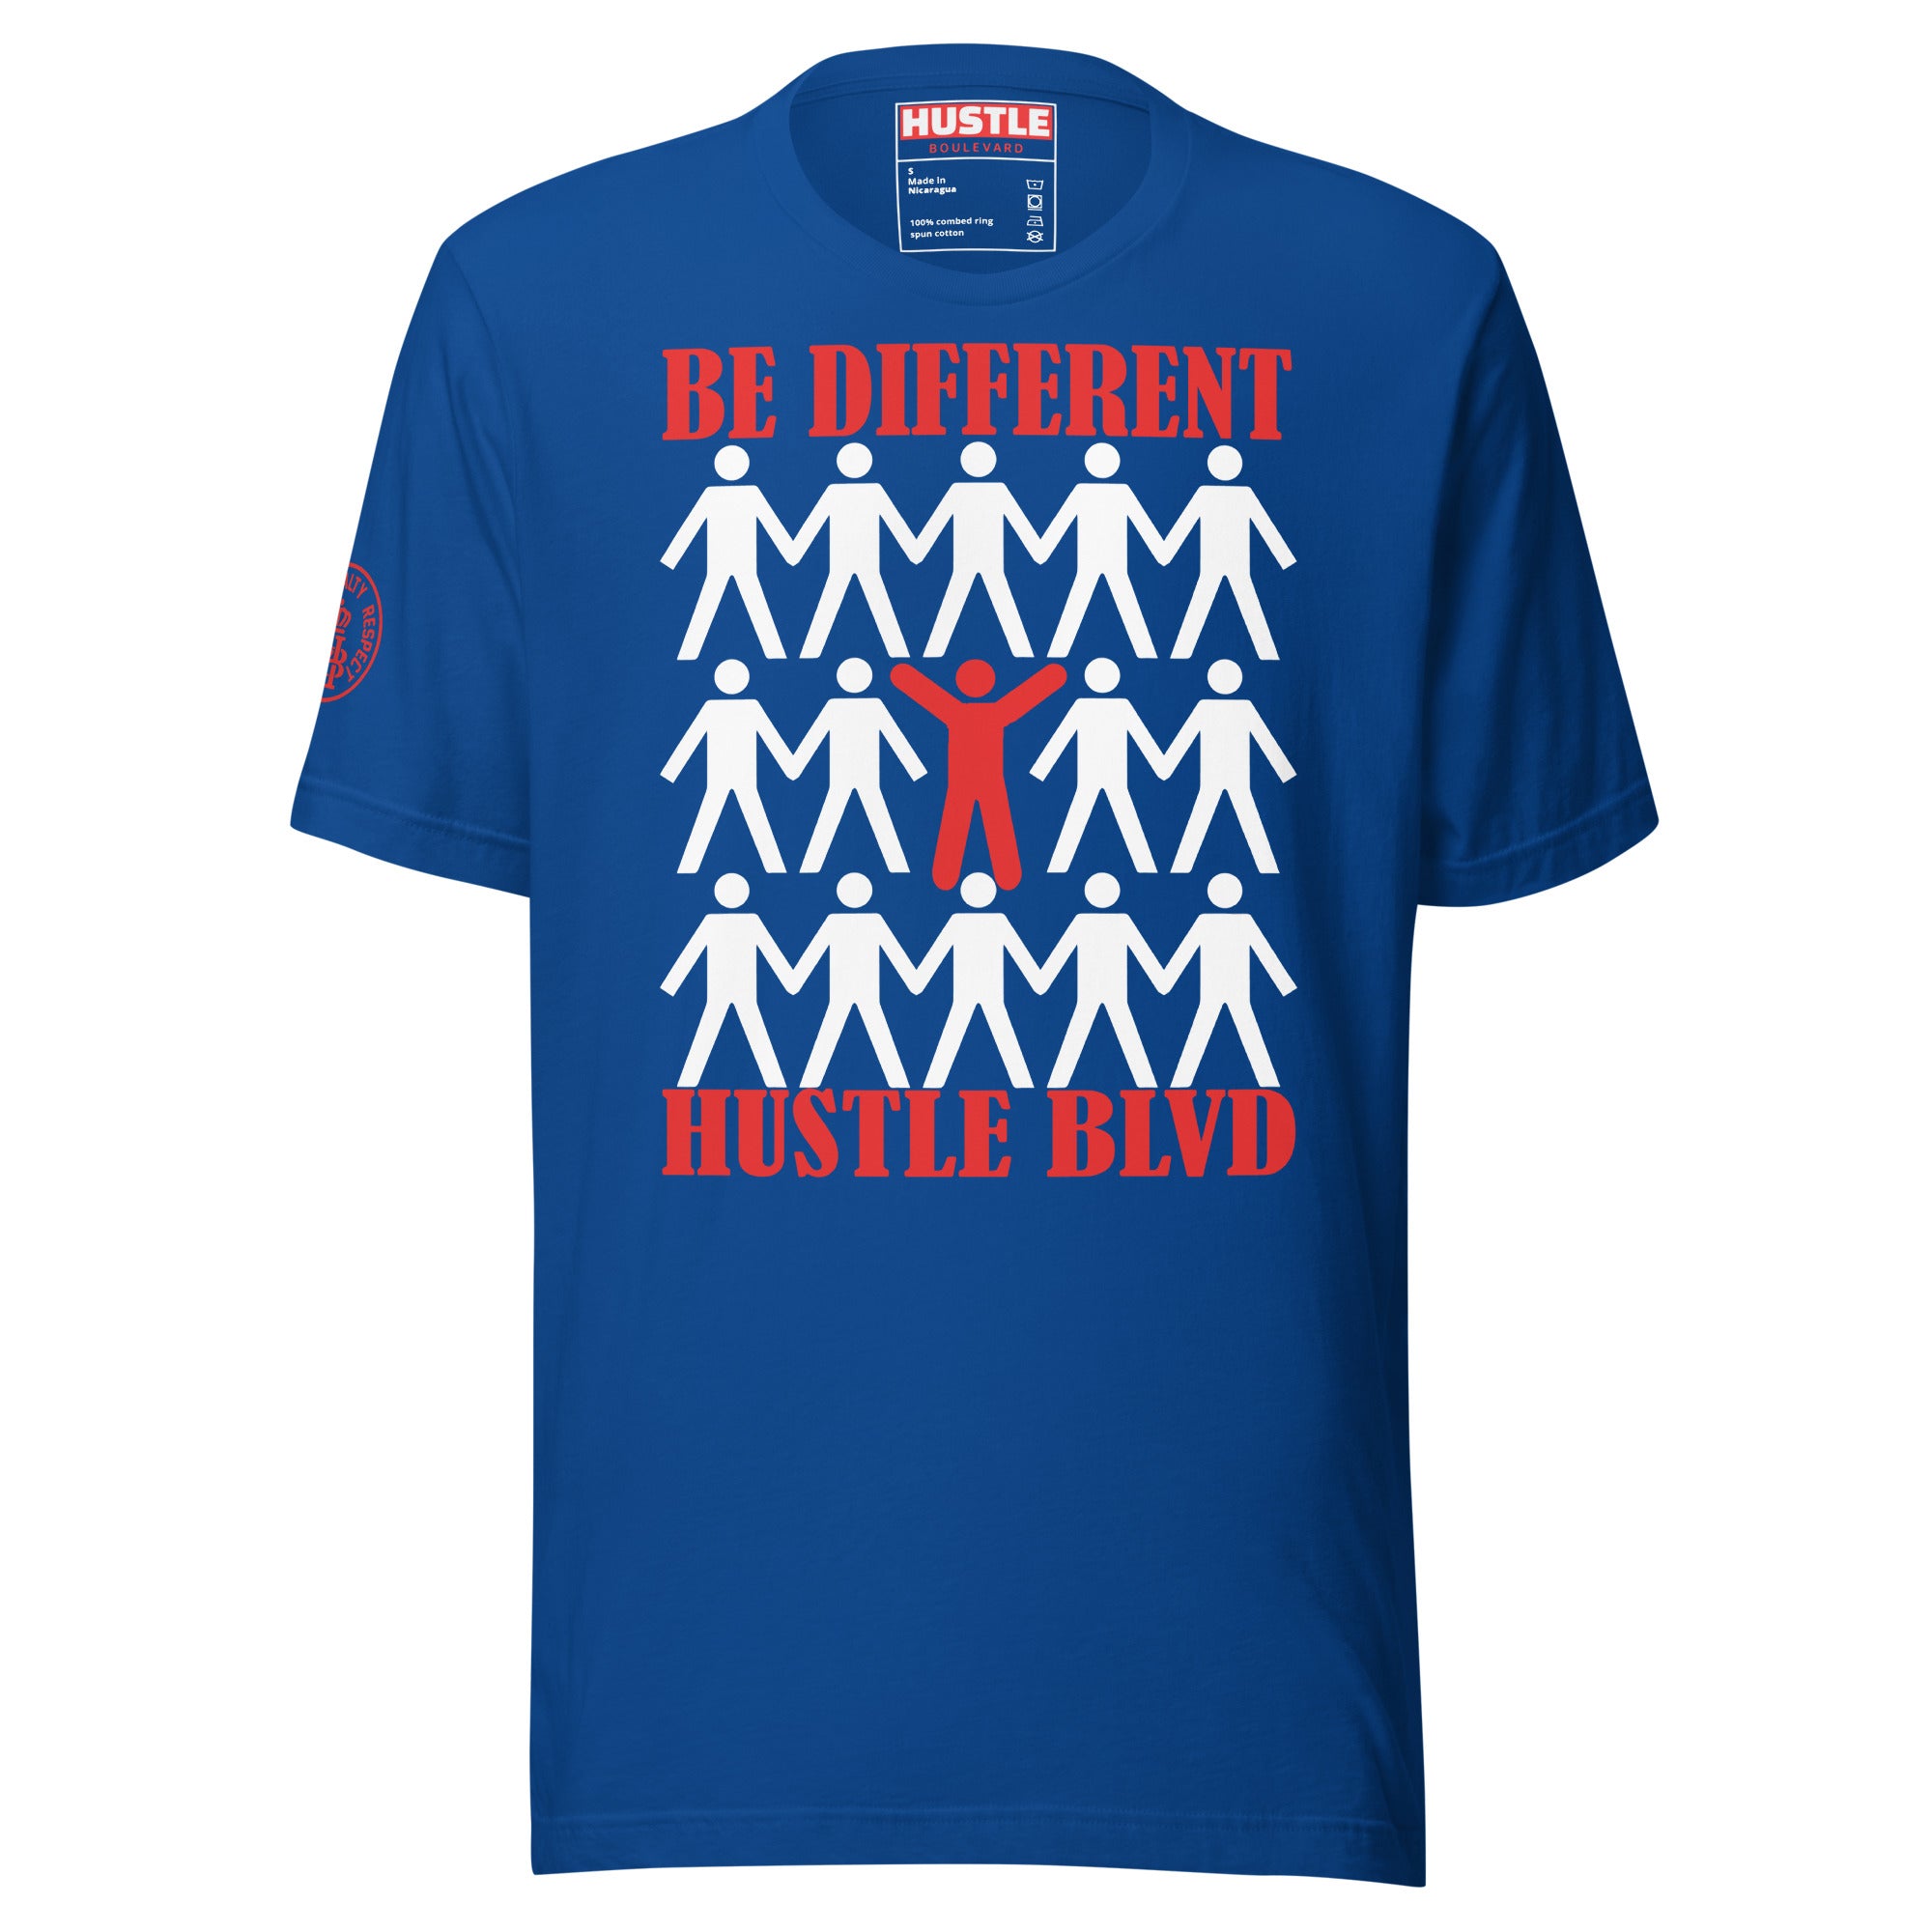 BE DIFFERENT : Unisex t-shirt